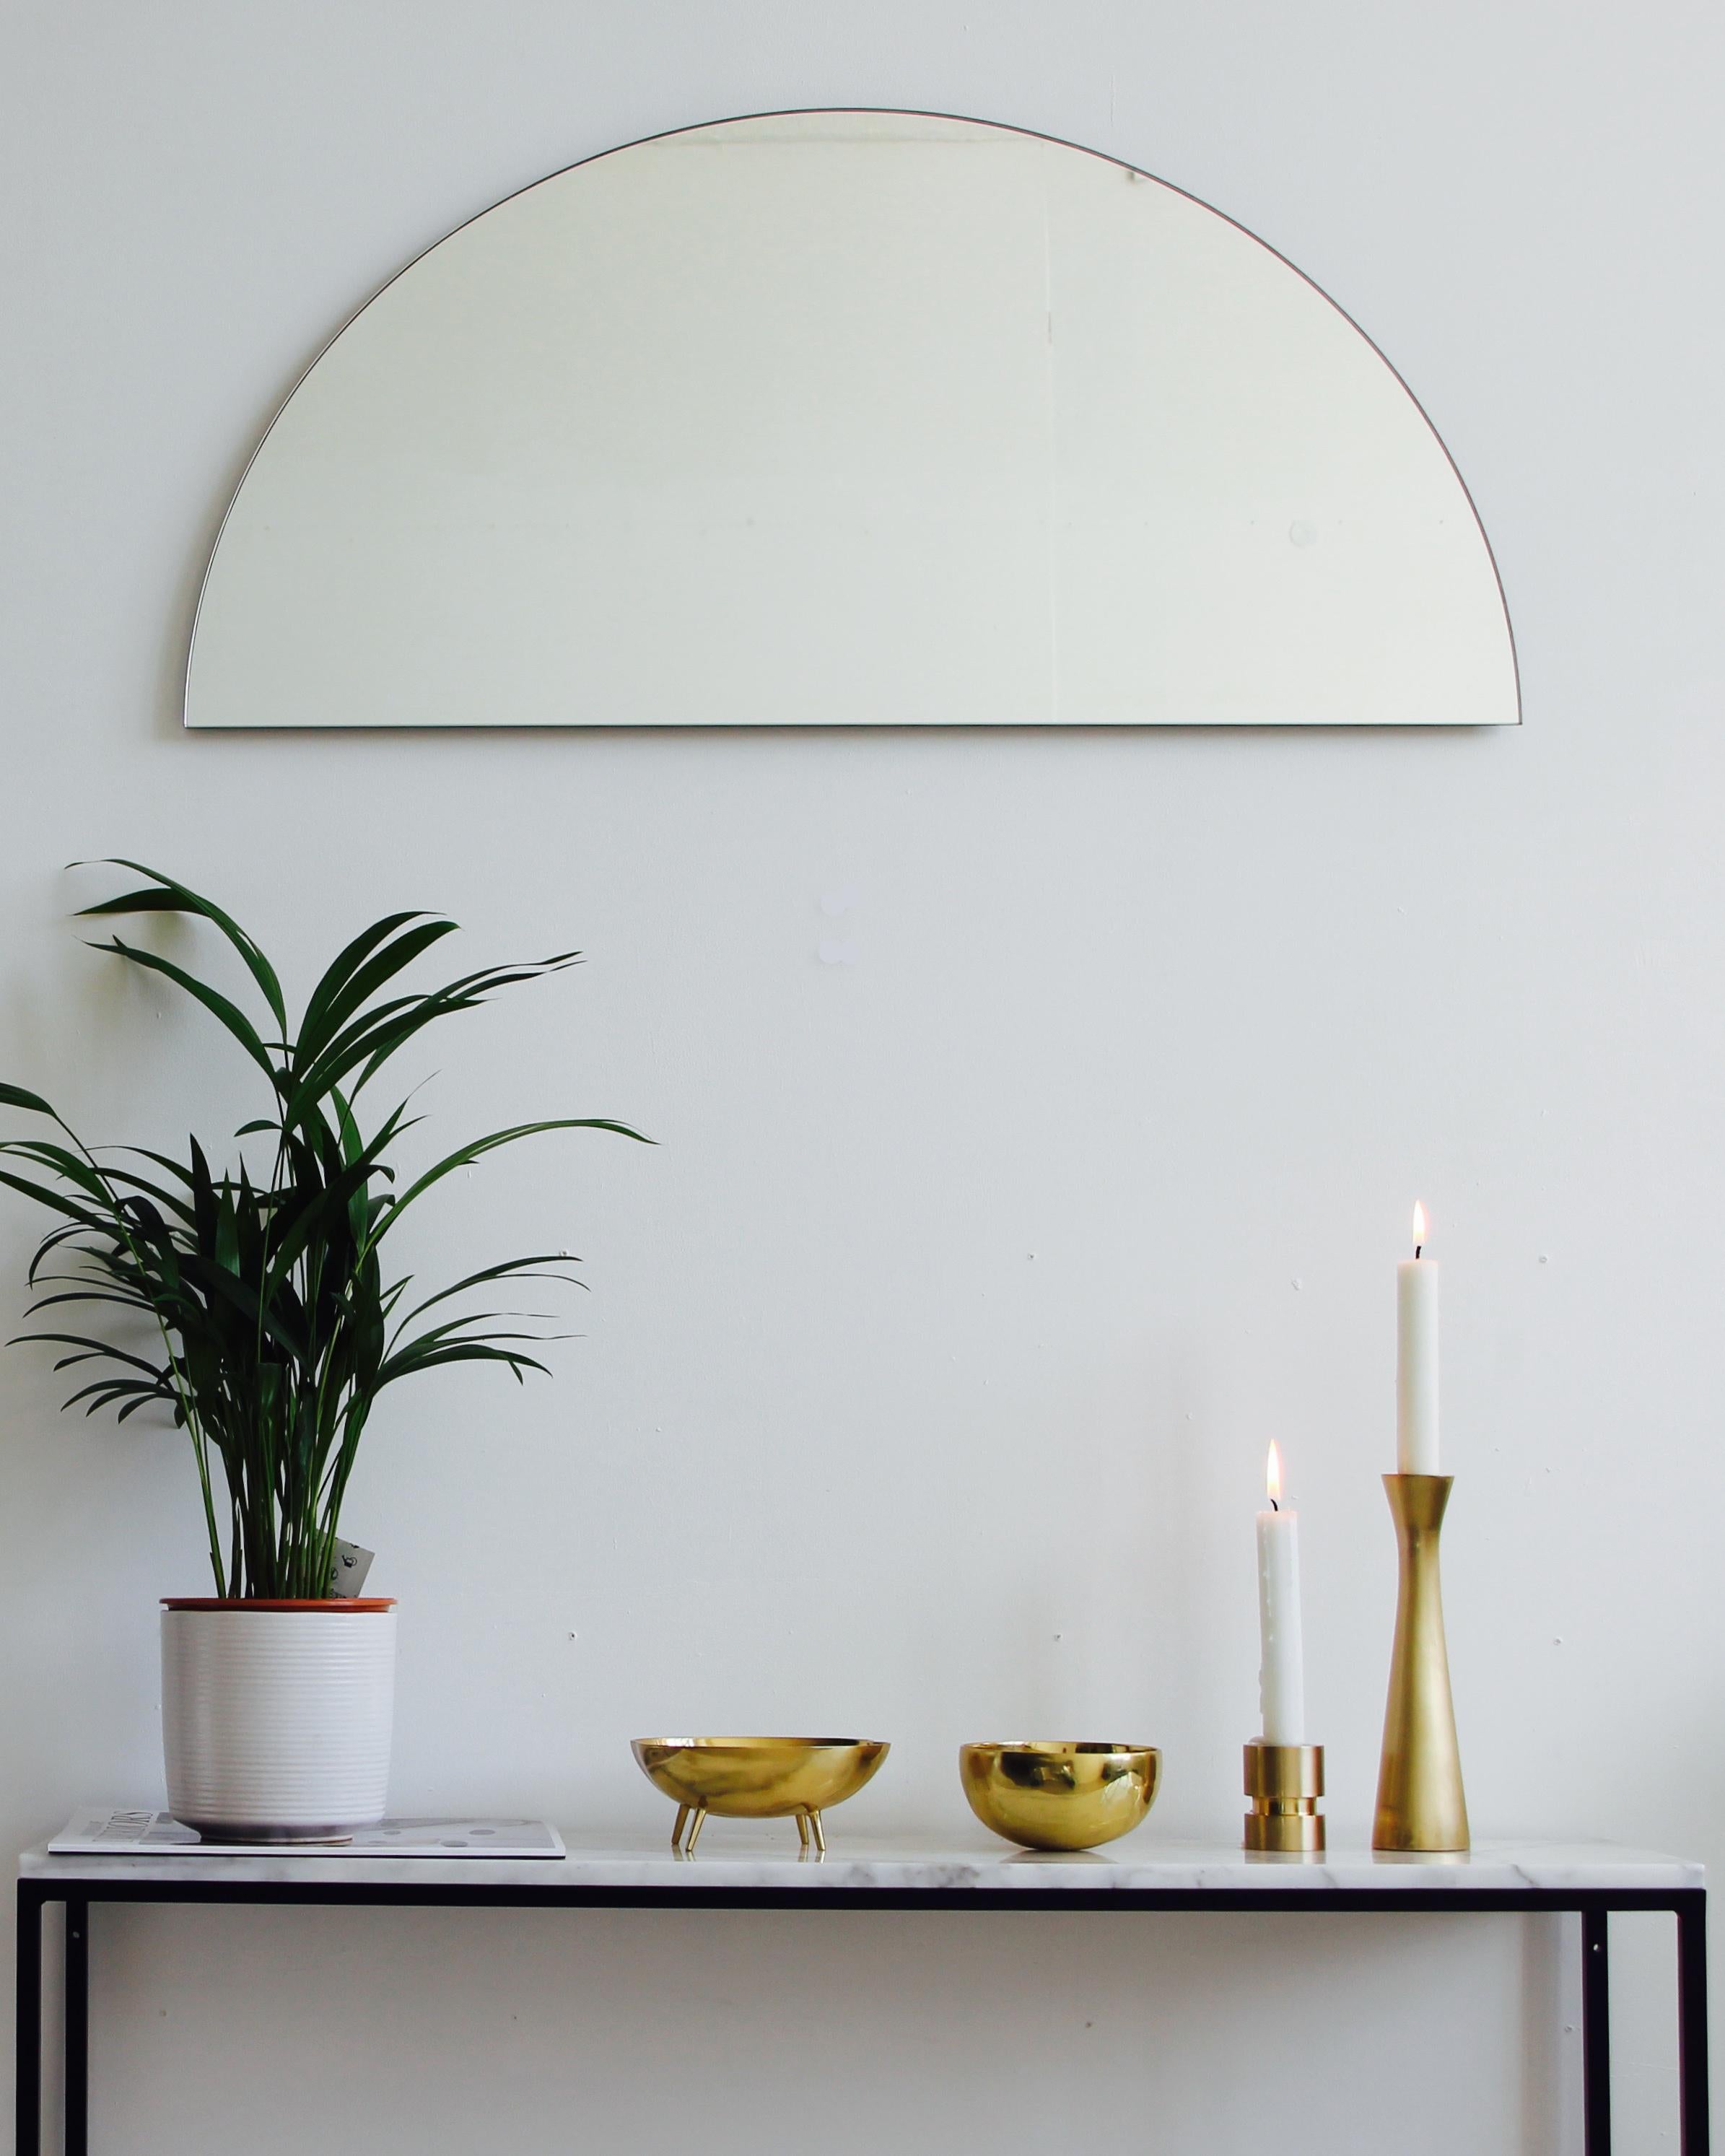 Delightful crafted silver tinted mirror frameless with a floating effect. Design and hand-crafted in London, UK.

Alguacil & Perkoff  new and unusual Luna Orbis™ mirror collection provides the freedom to achieve multiple configurations with one